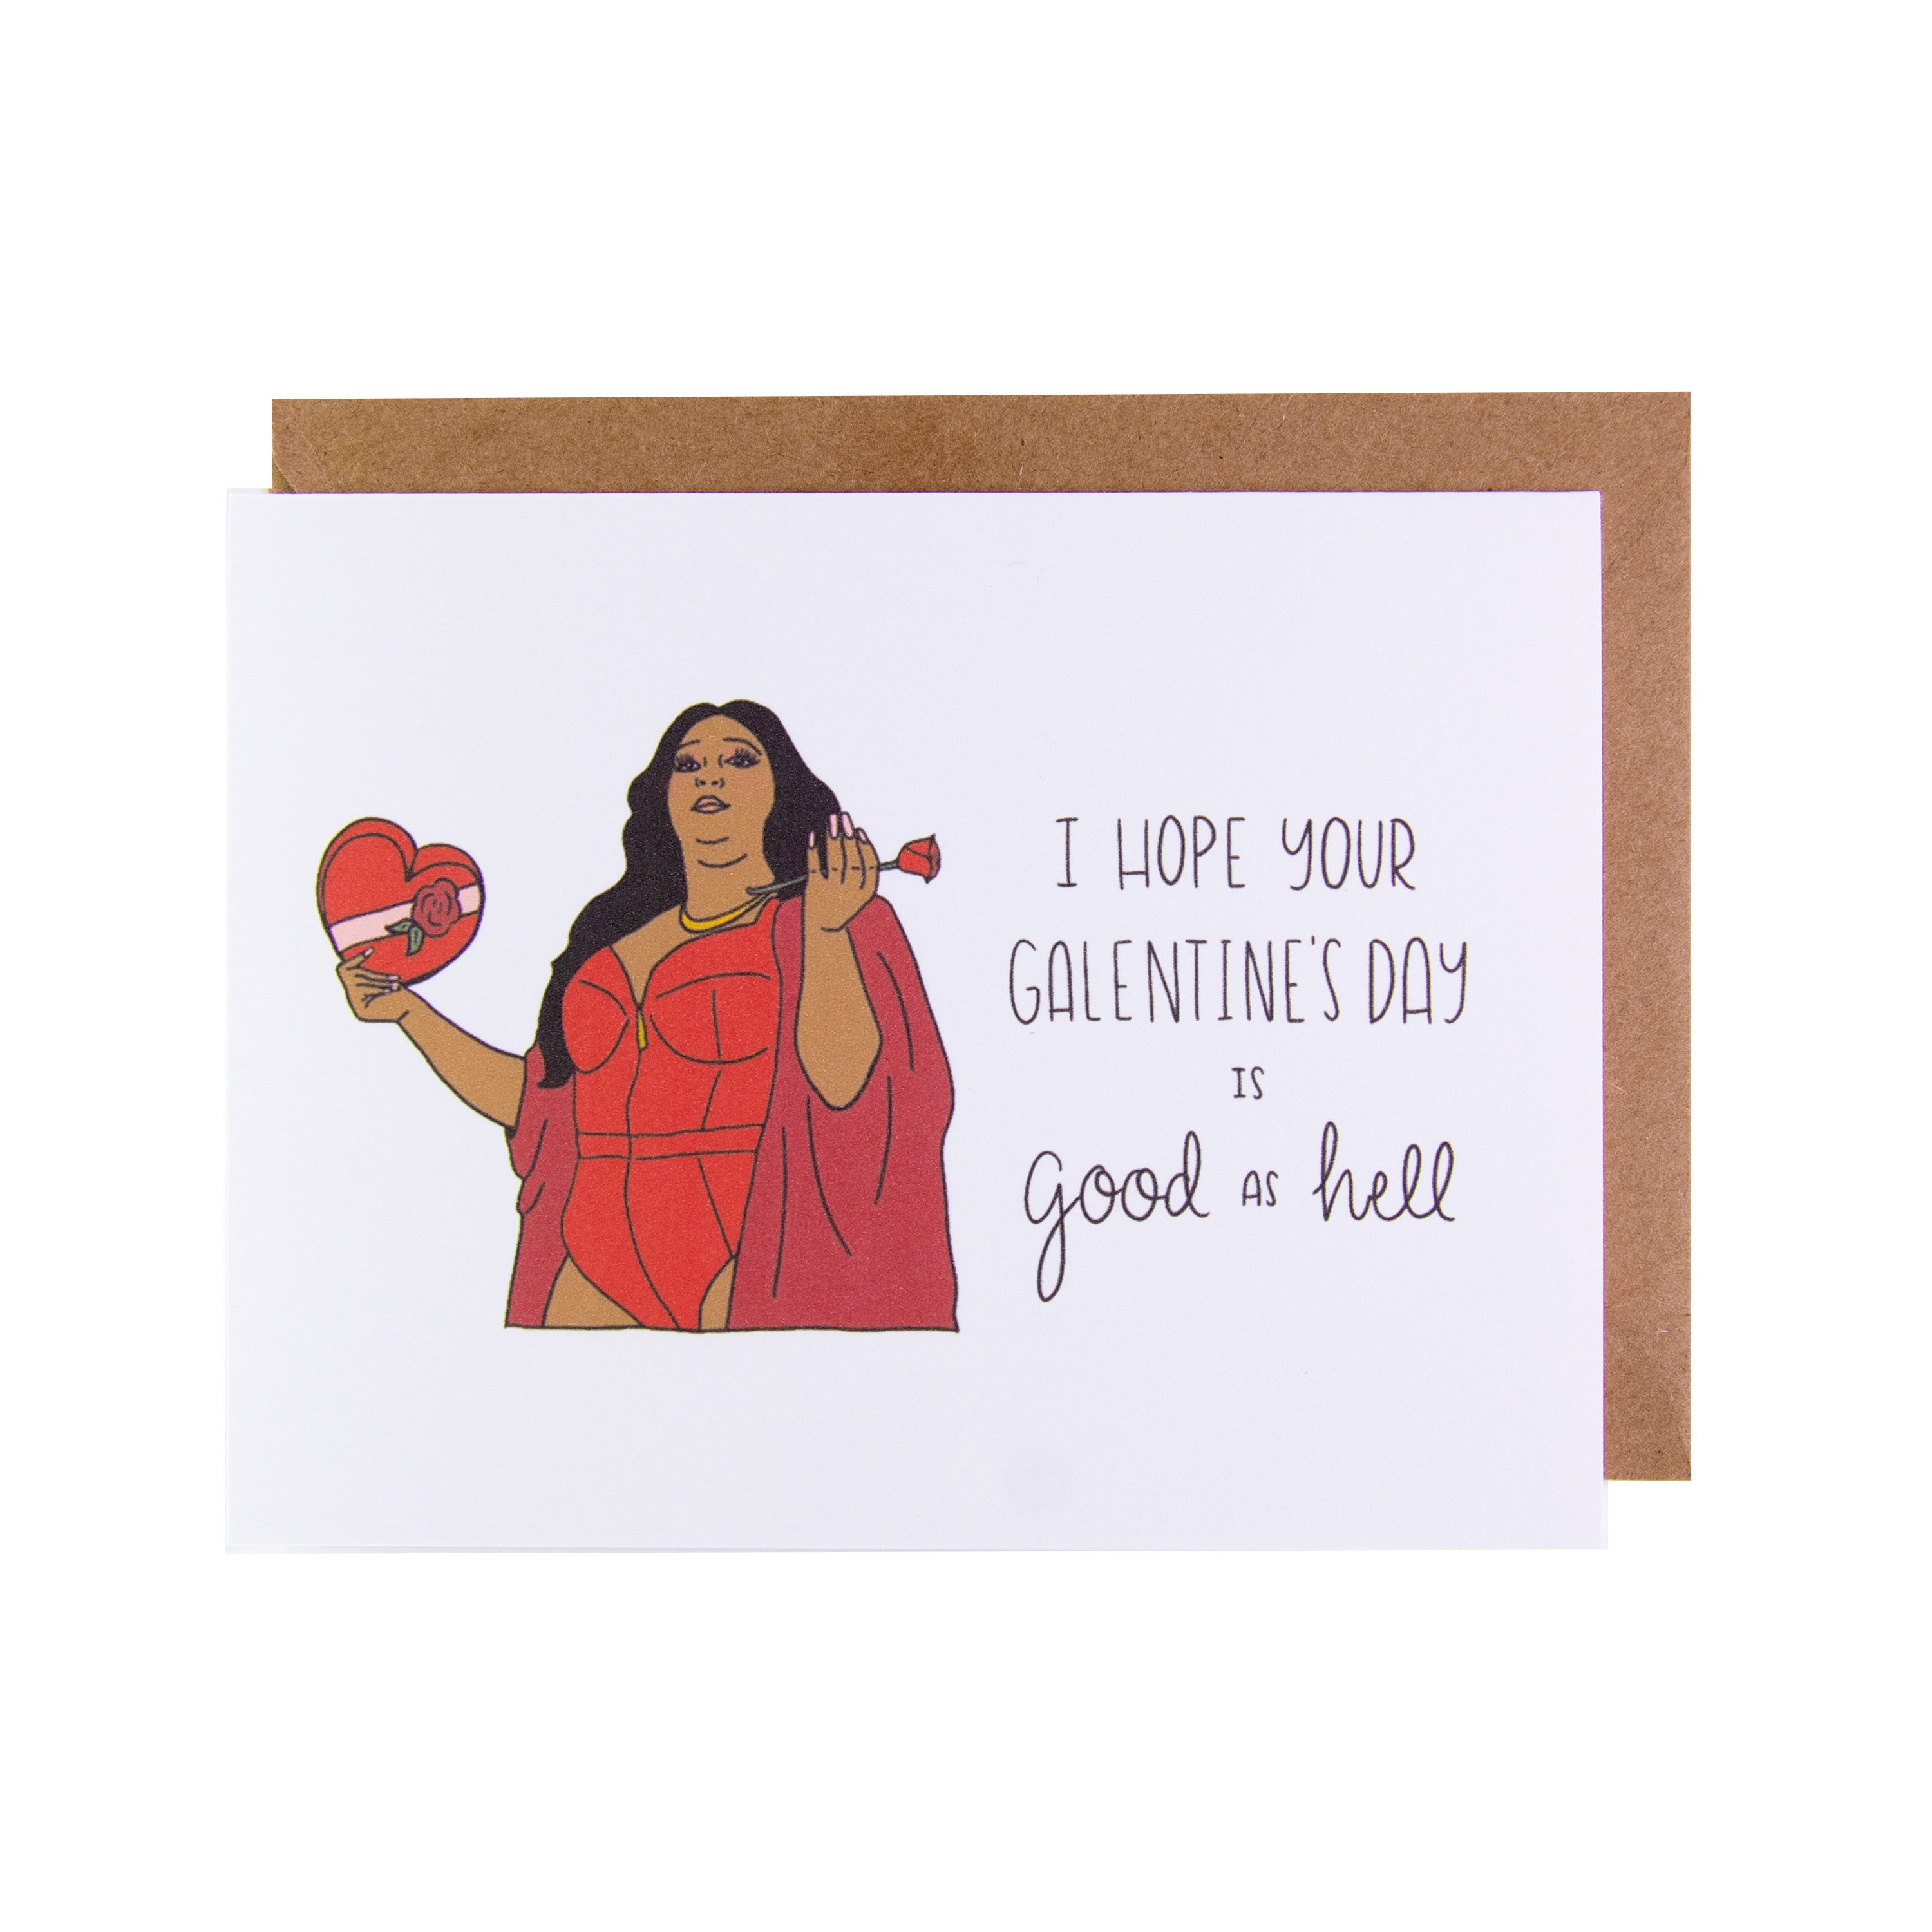 Funny Galentine's Day Card - Big Wine Glass Gal from